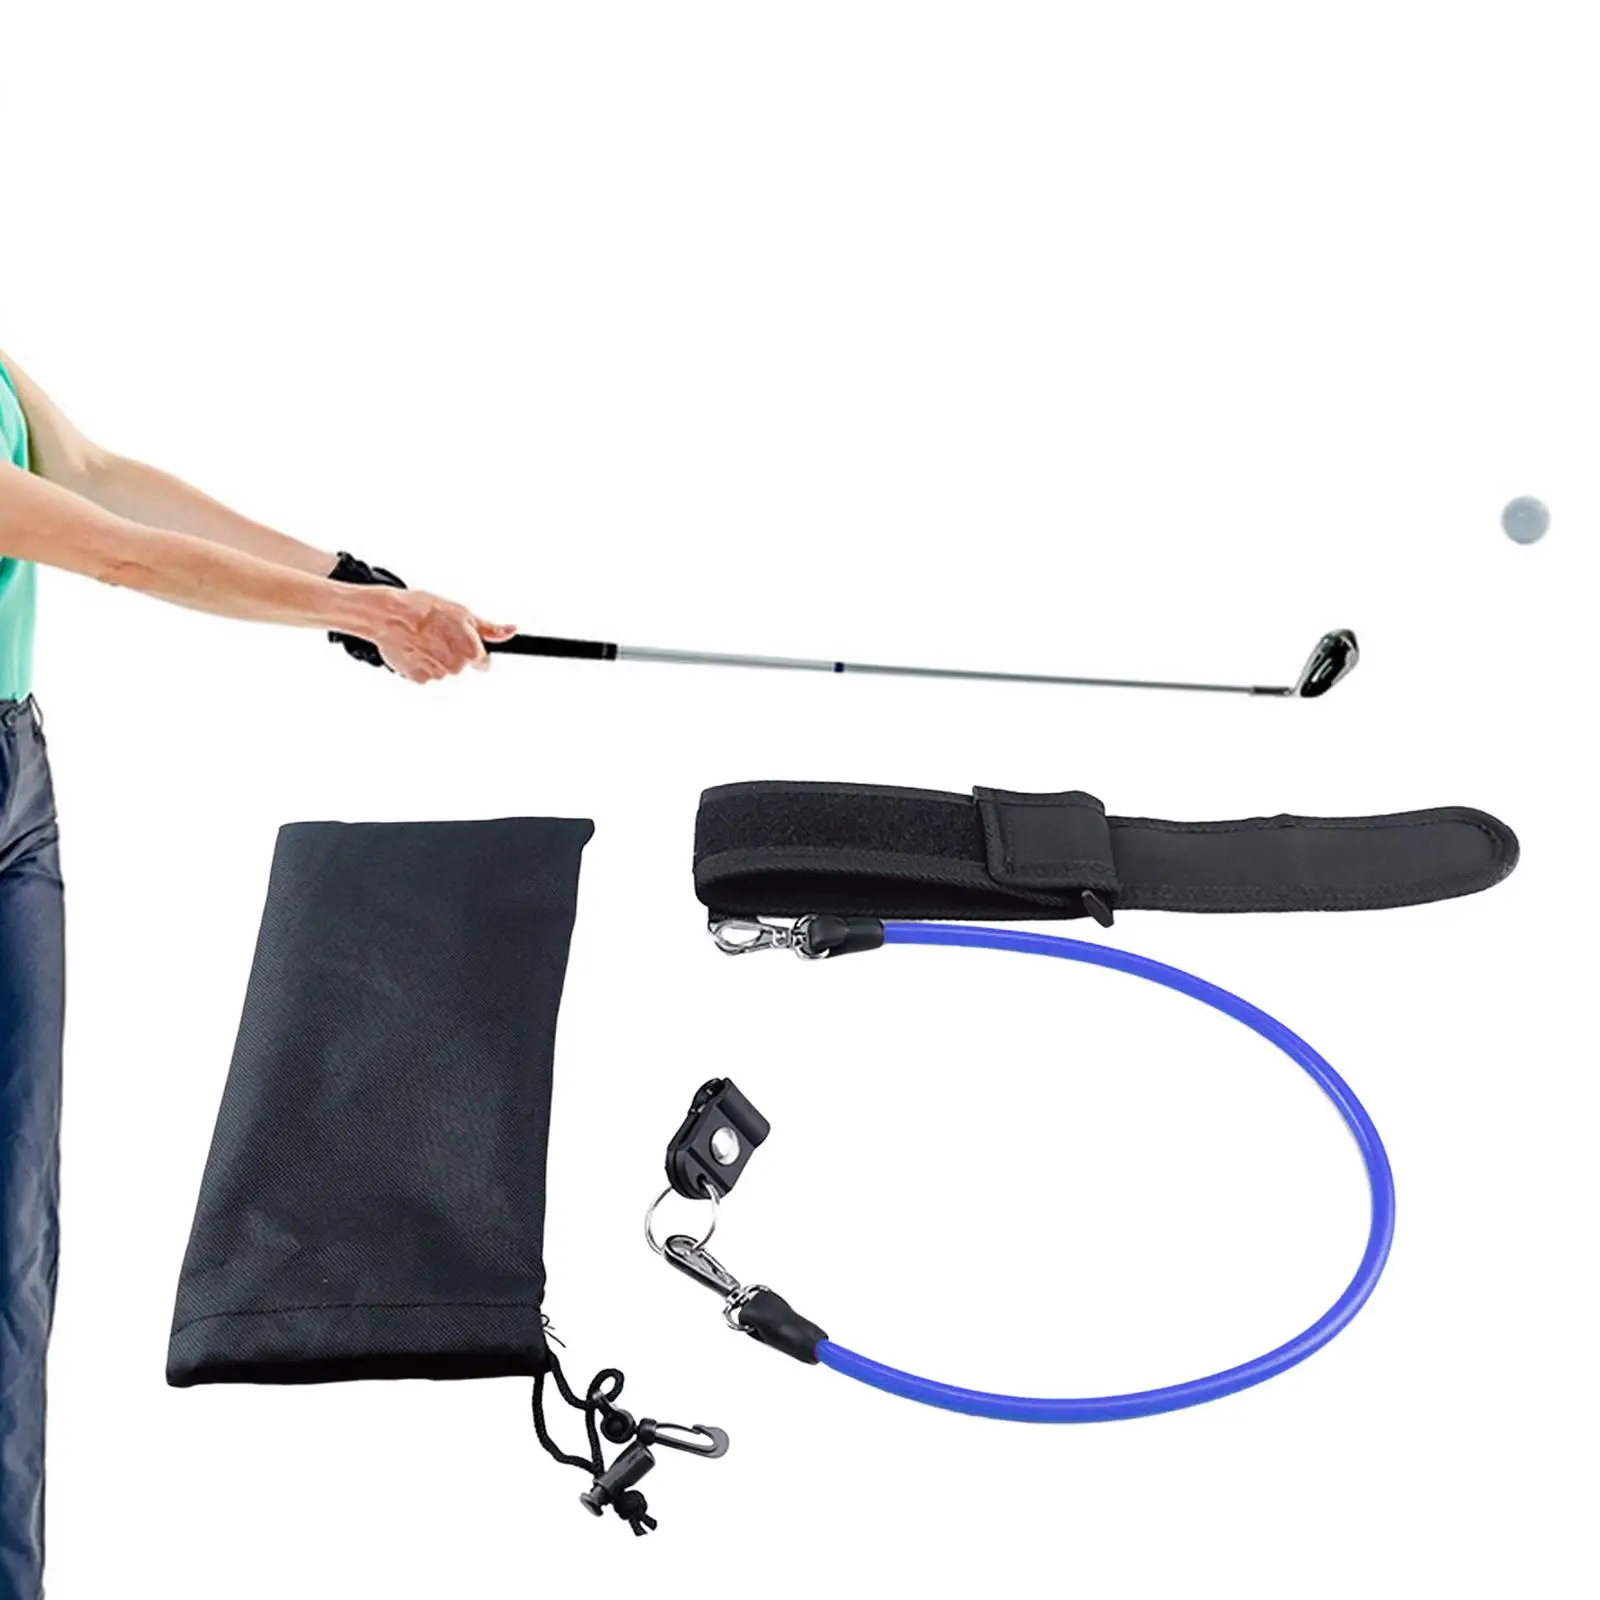 Golf Swing Release Trainer Portable for Teaching Posture Strength Training